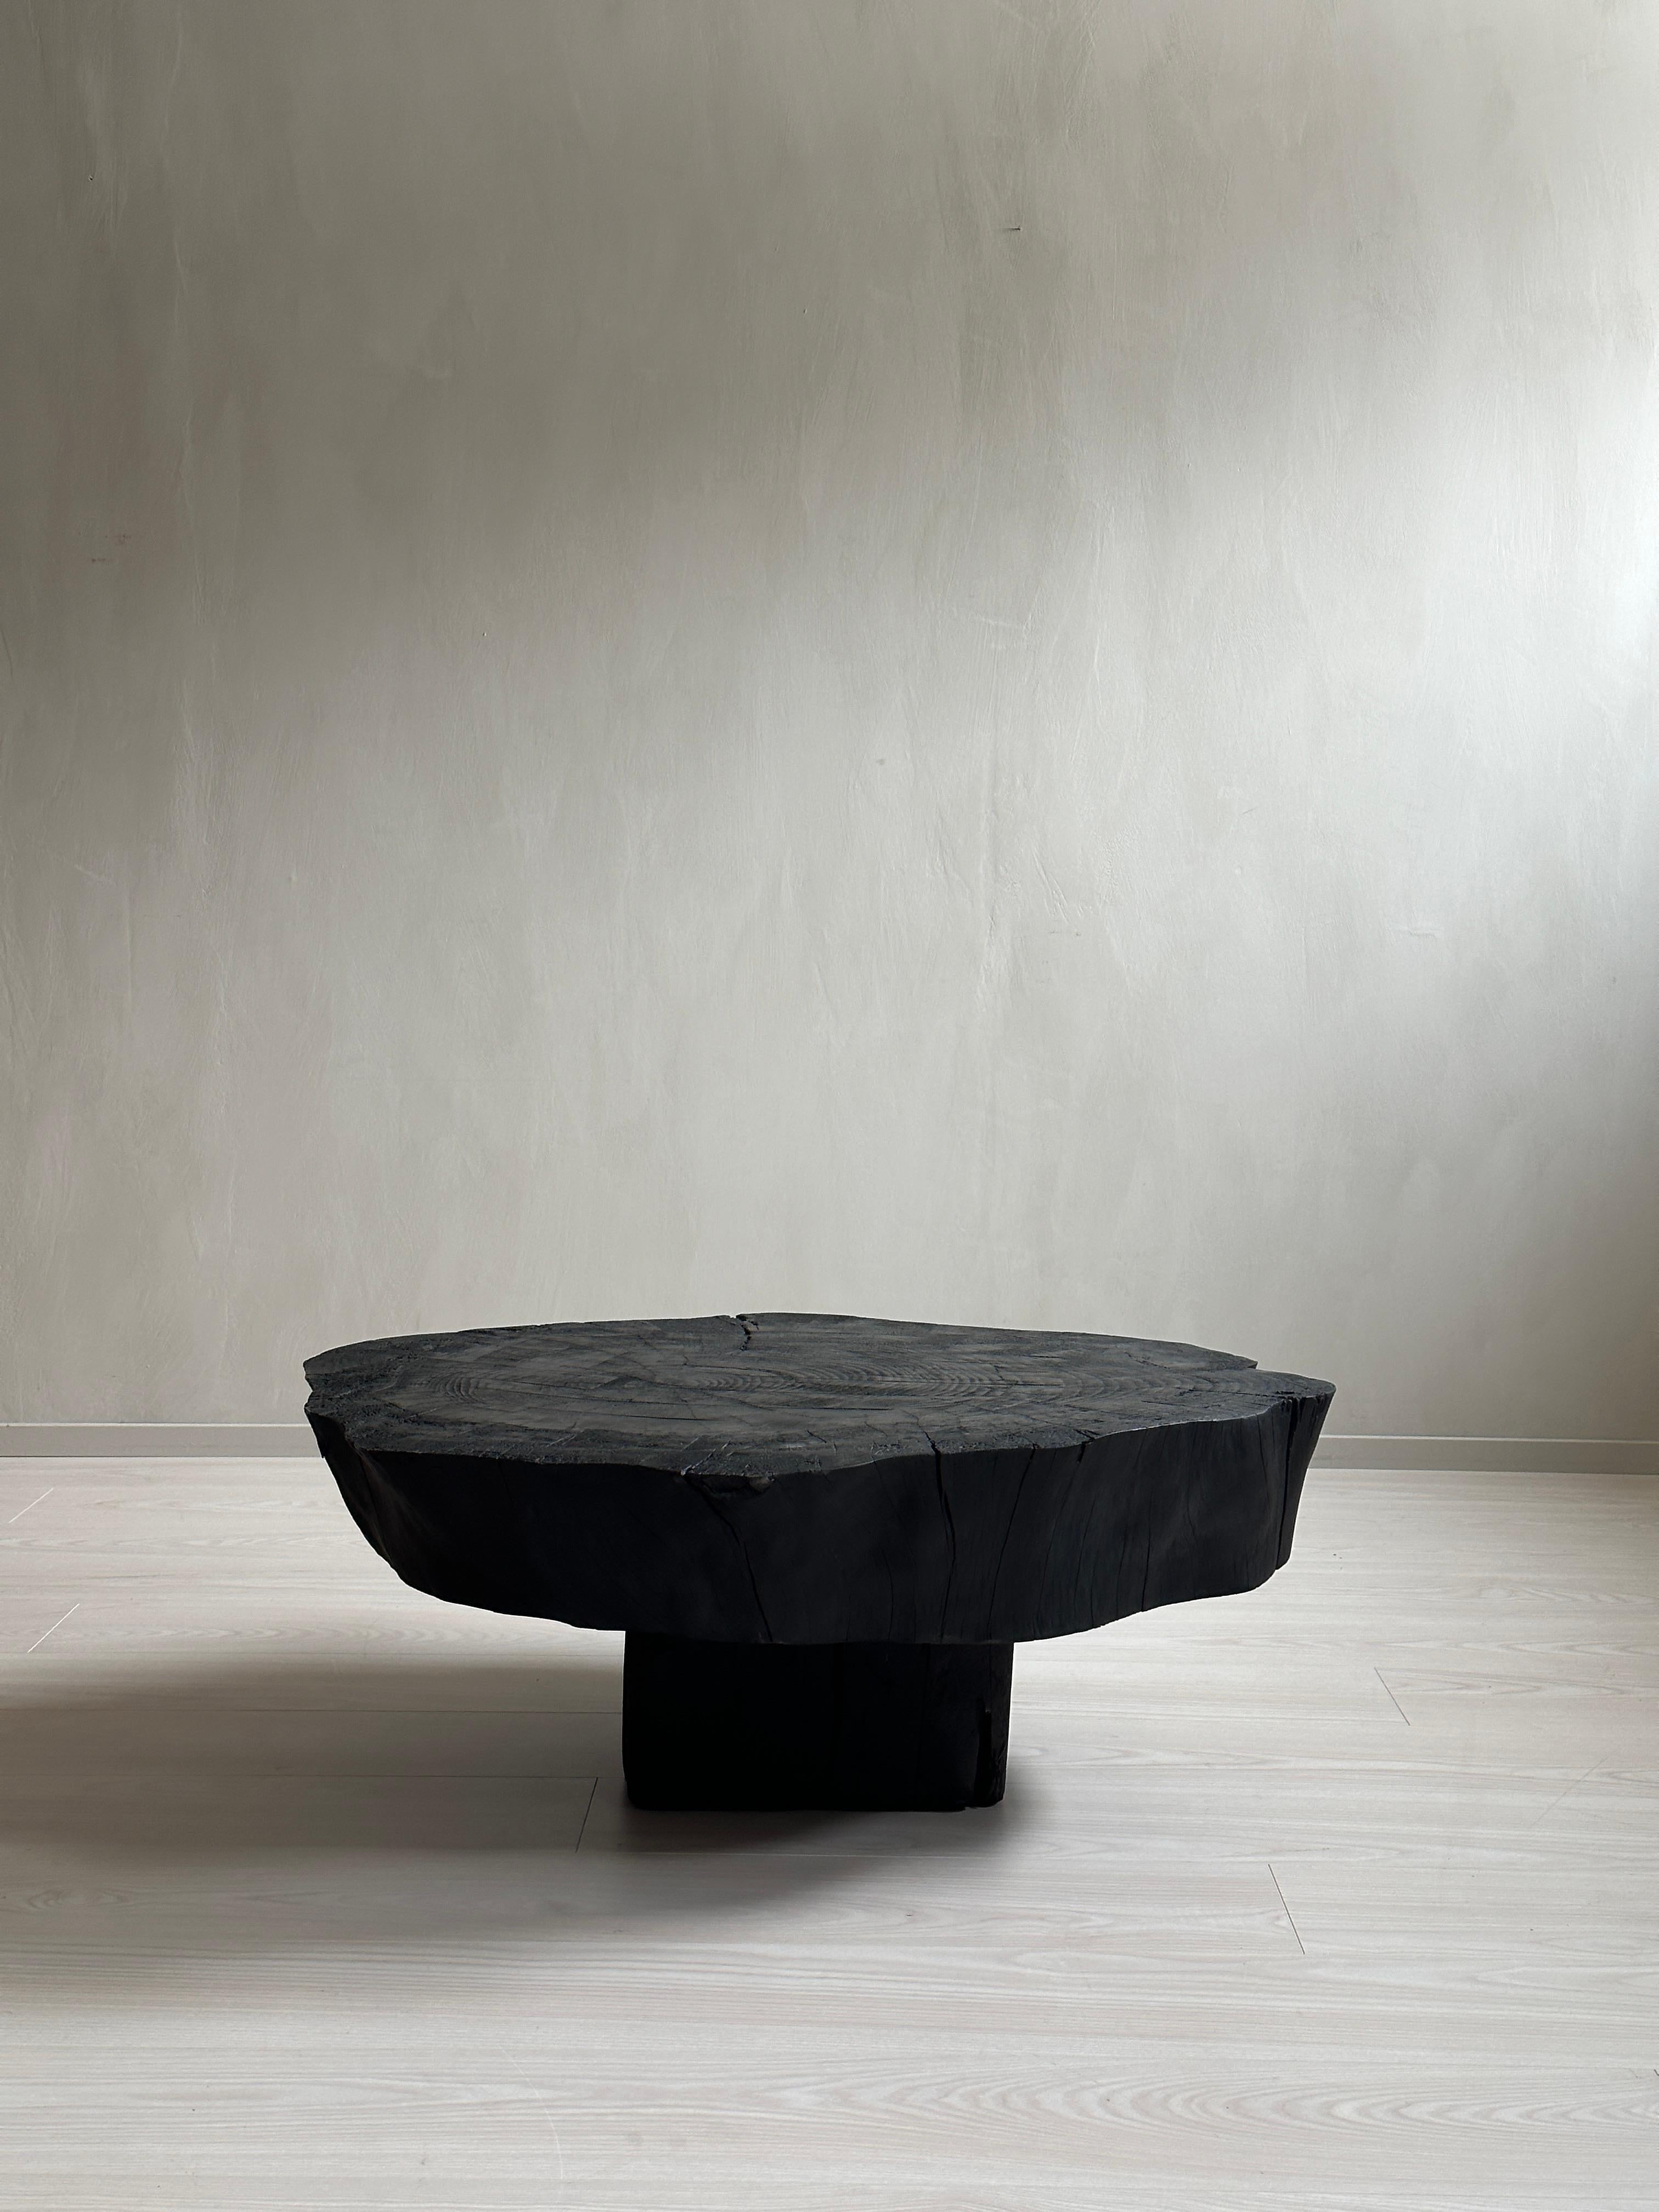 Introducing this stunning Brutalist coffee table, crafted in Spain in the 1970s and later Ebonized. This unique piece is designed in the Wabi Sabi style, featuring a beautifully distressed ebonized finish that adds to its rugged and organic